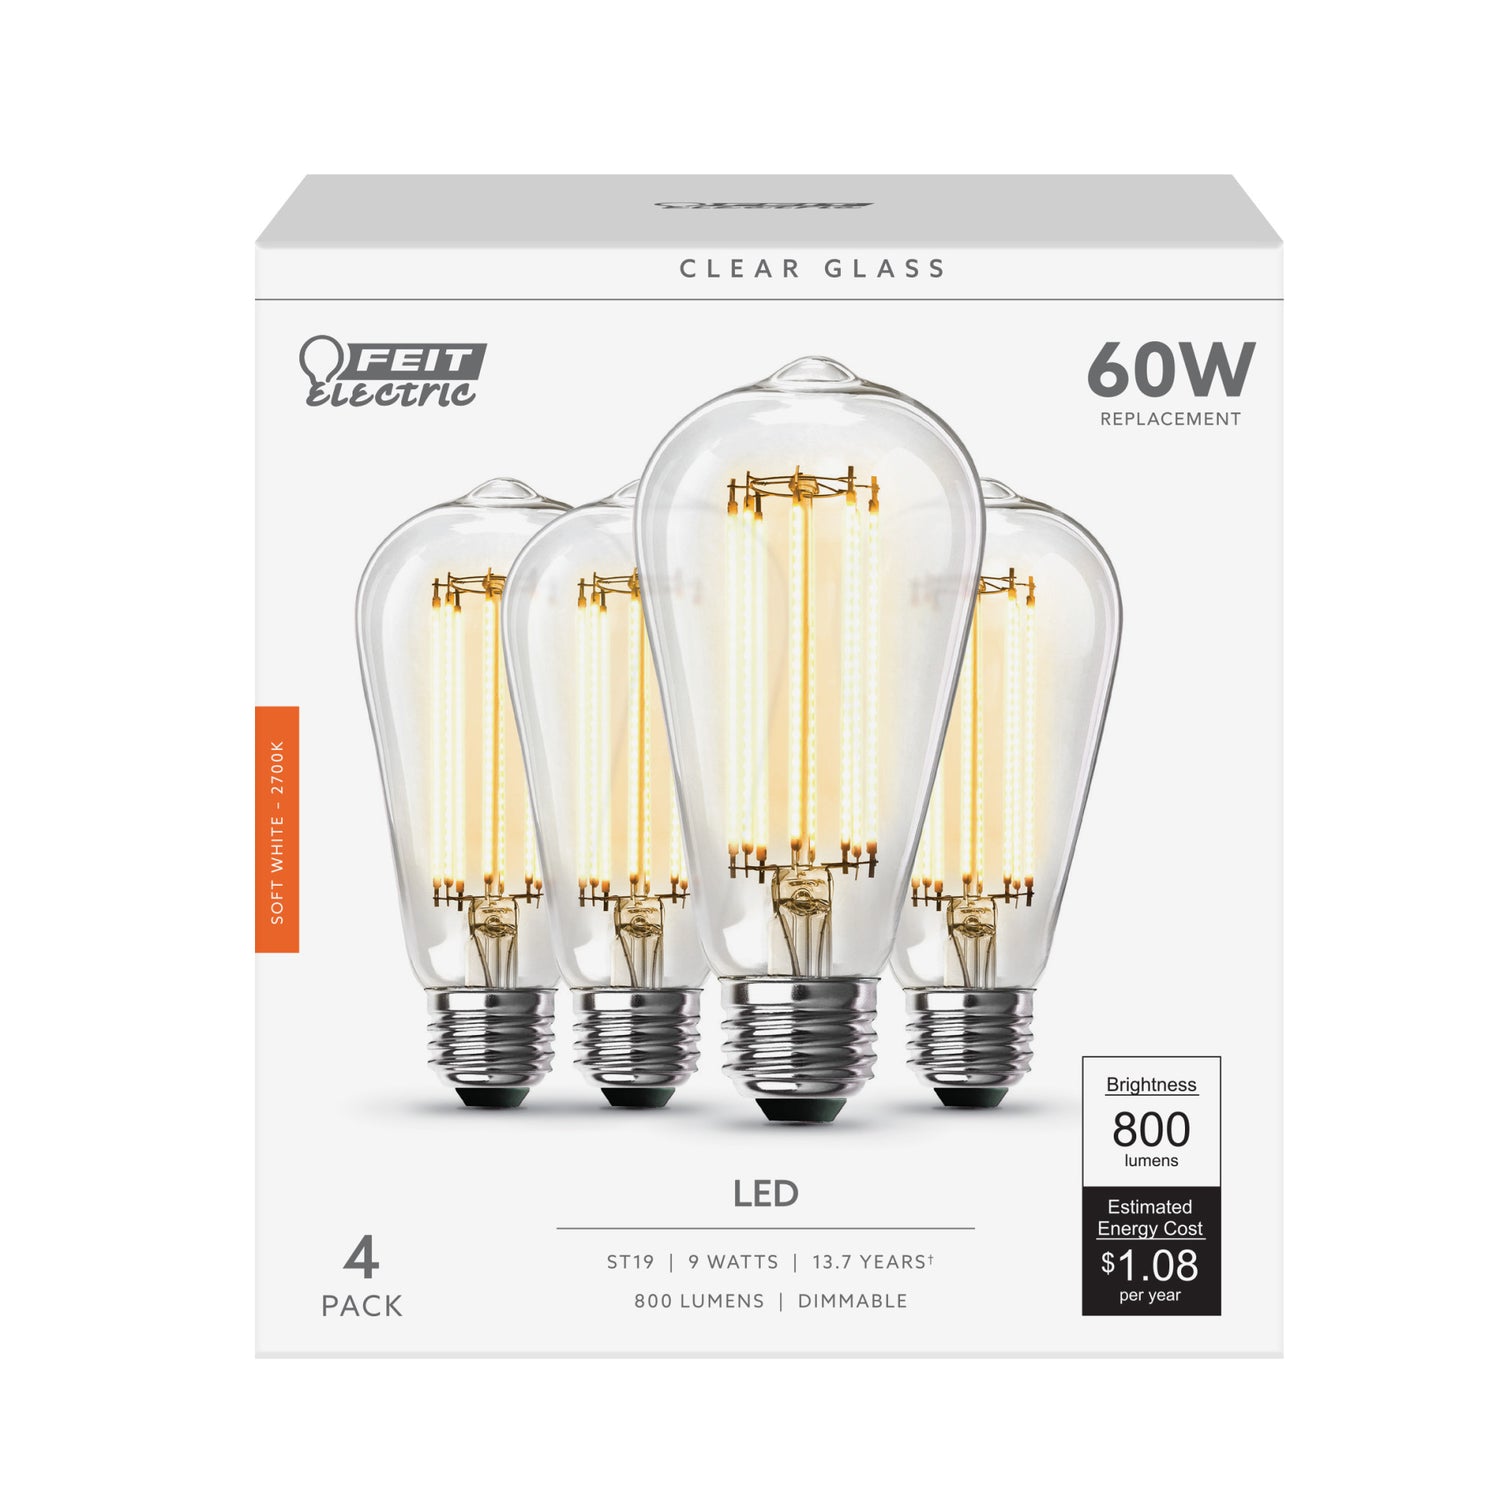 9W (60W Replacement) ST19 E26 Dimmable Straight Filament Clear Glass Vintage Edison LED Light Bulb, Soft White (24-Pack)